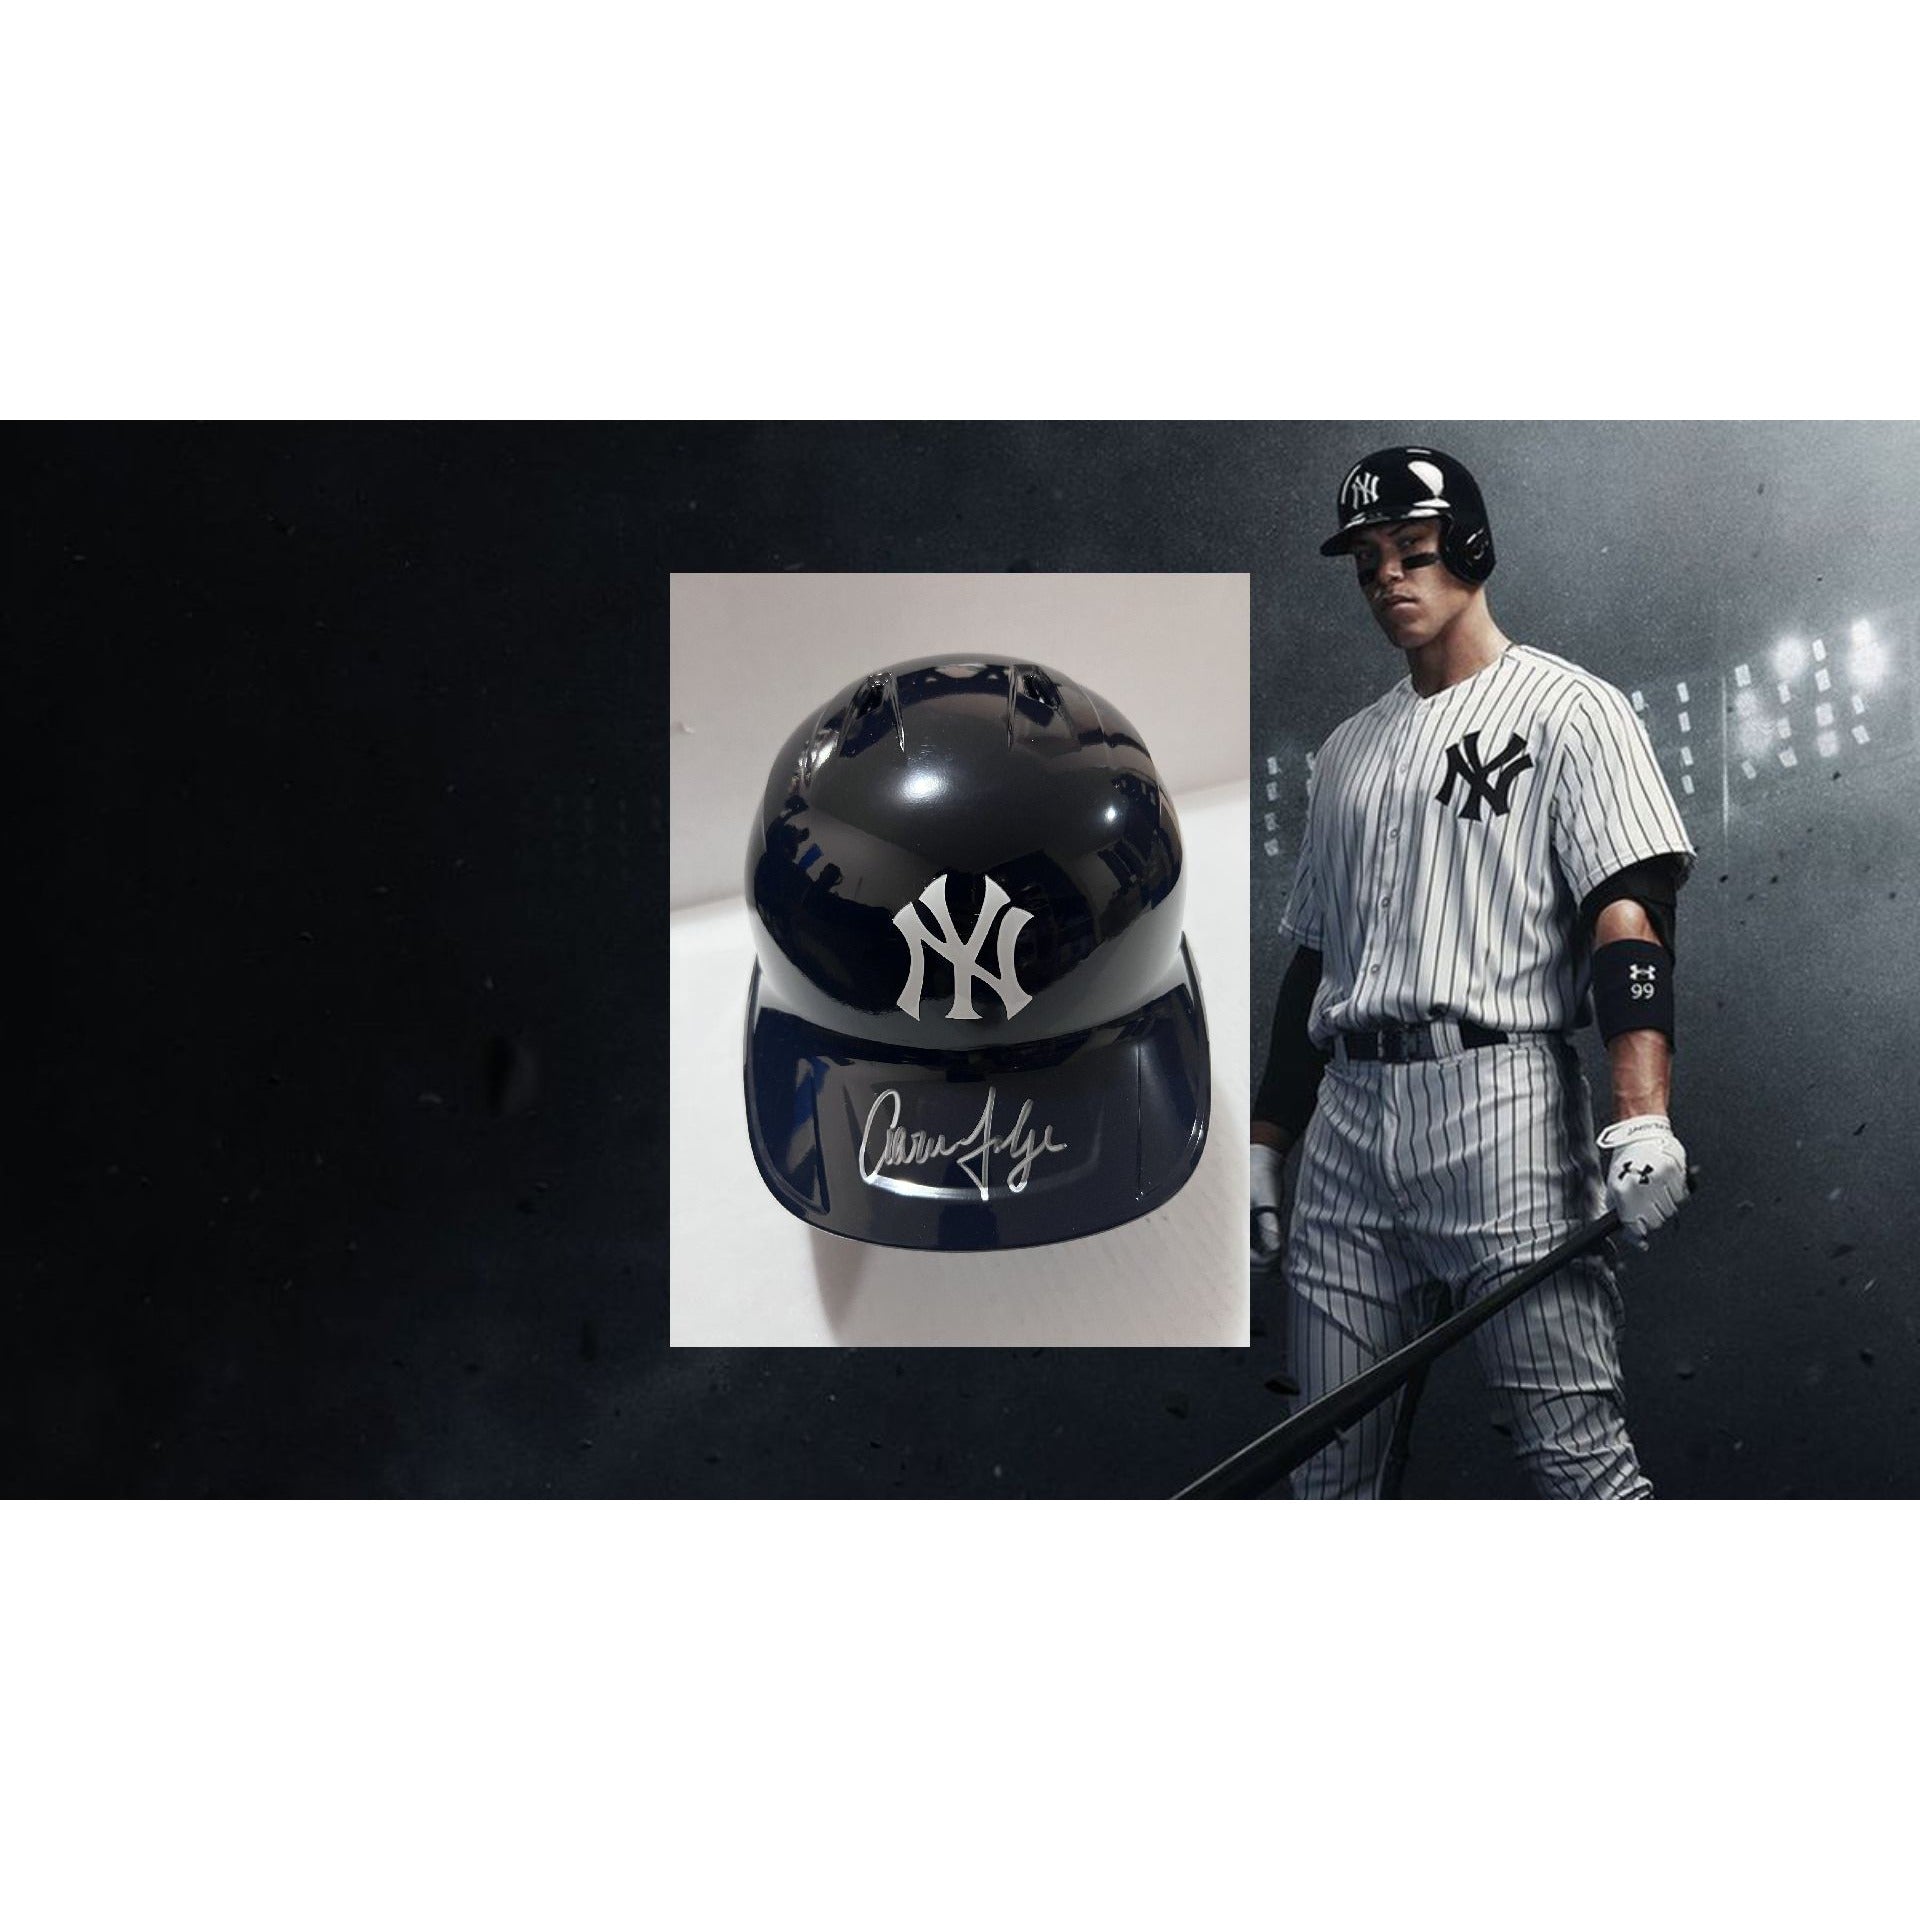 Aaron Judge New York Yankees full size batting helmet signed with proof (and free display case)